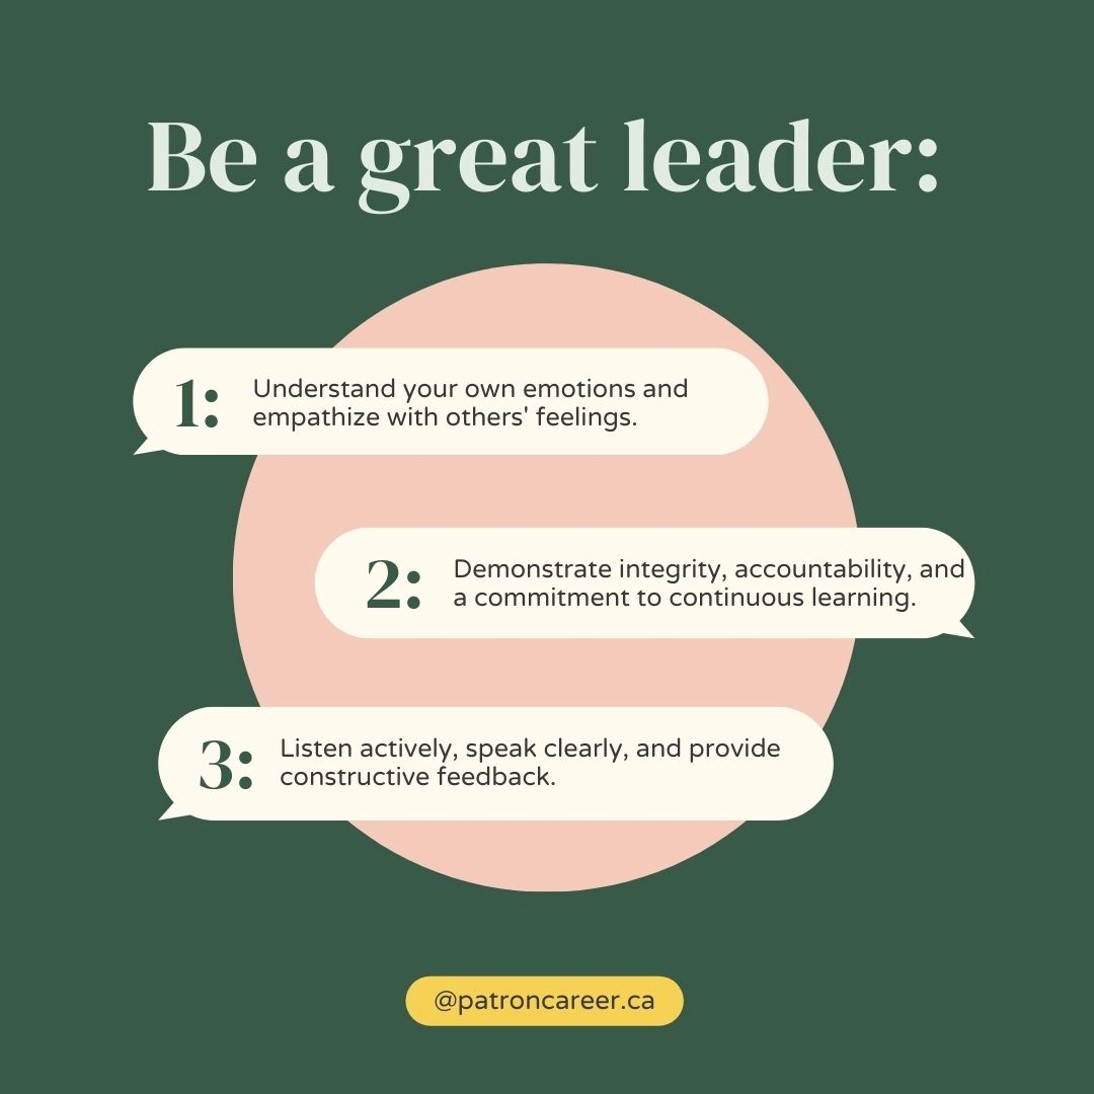 Be a great leader